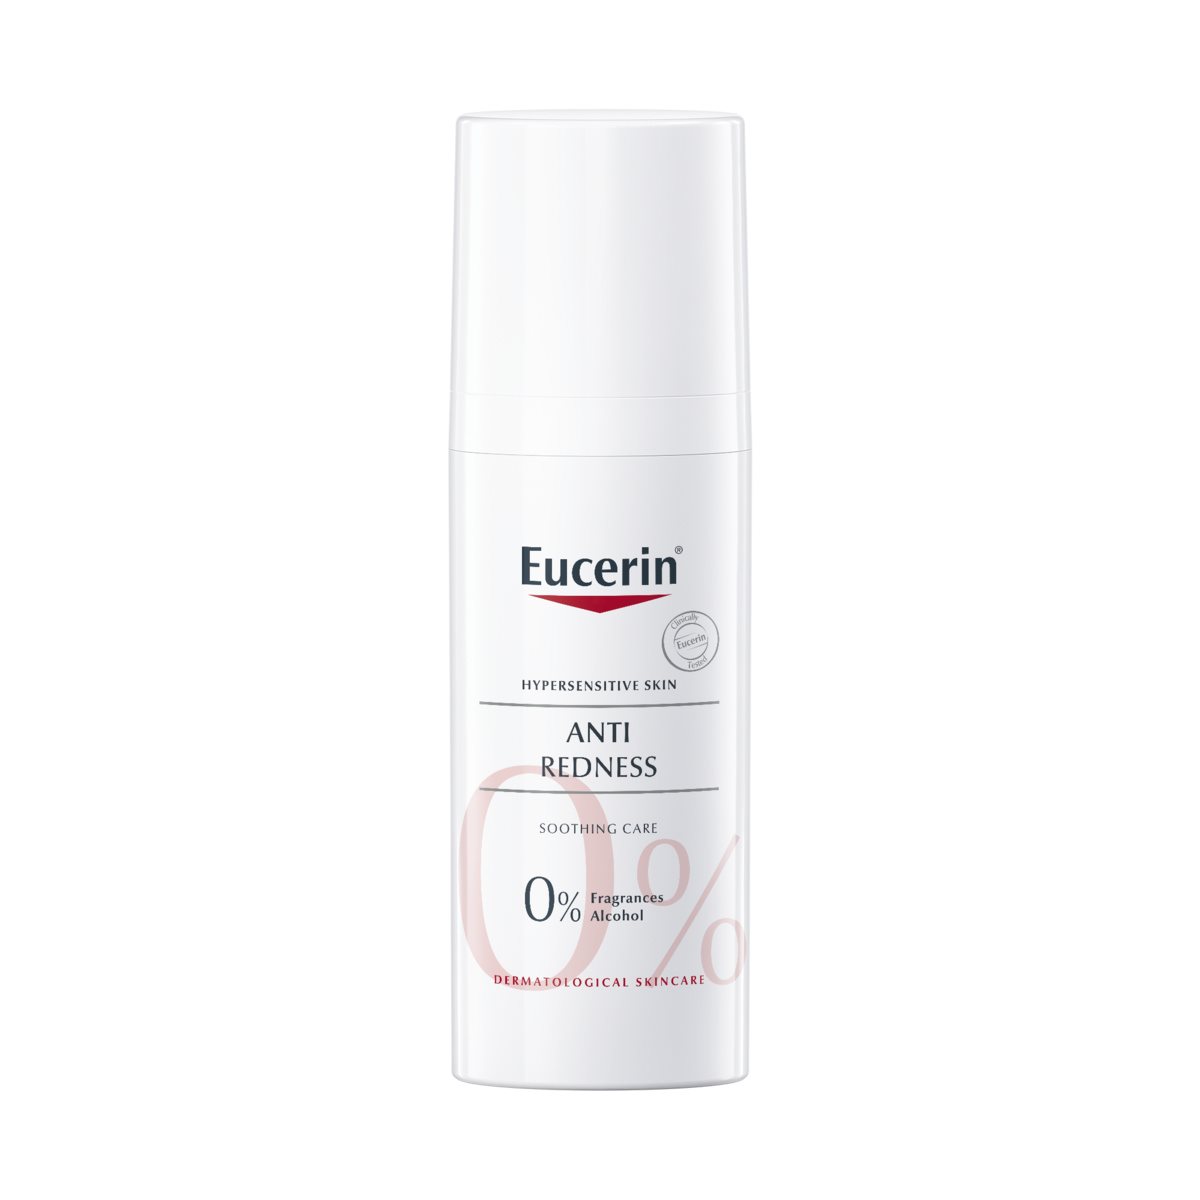 Anti-redness Soothing Care